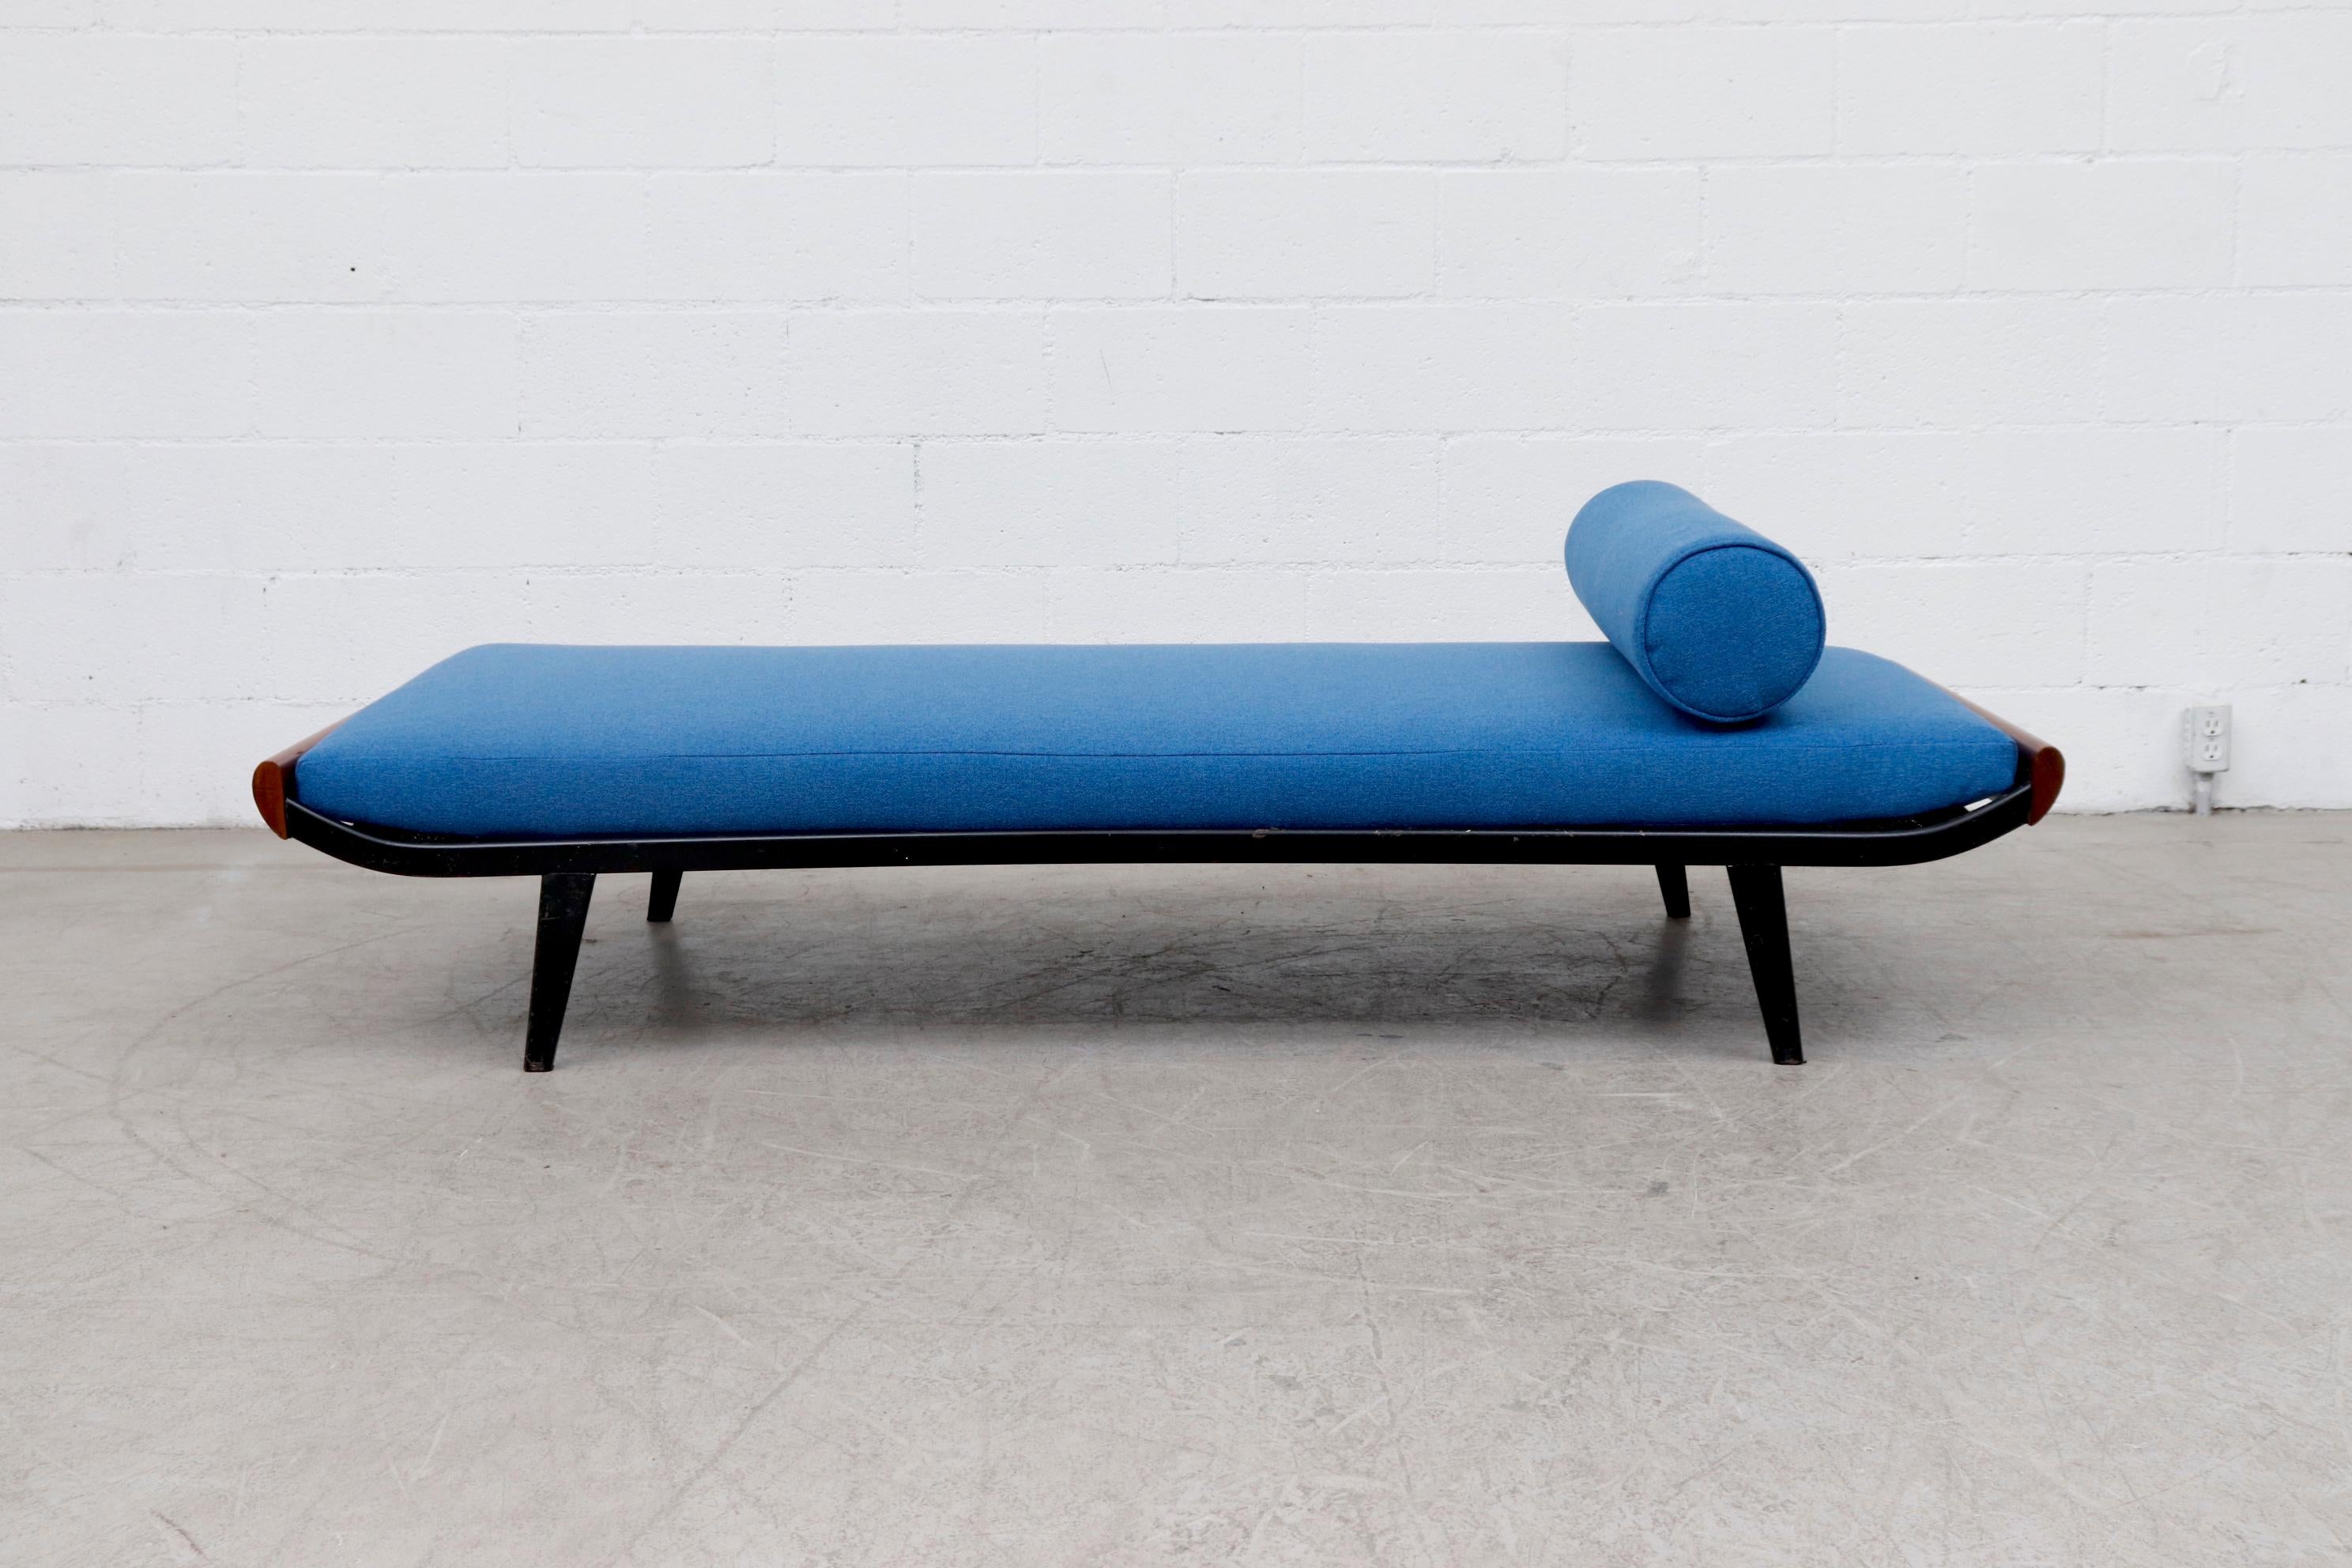 Beautiful 1960s Cleopatra daybed by A.R. Cordemeyer. Lightly refinished teak wood ends with dark grey metal enameled frame and 'Auping' tag on mesh springs with new azure blue mattress and matching bolster. Frame in original condition with visible